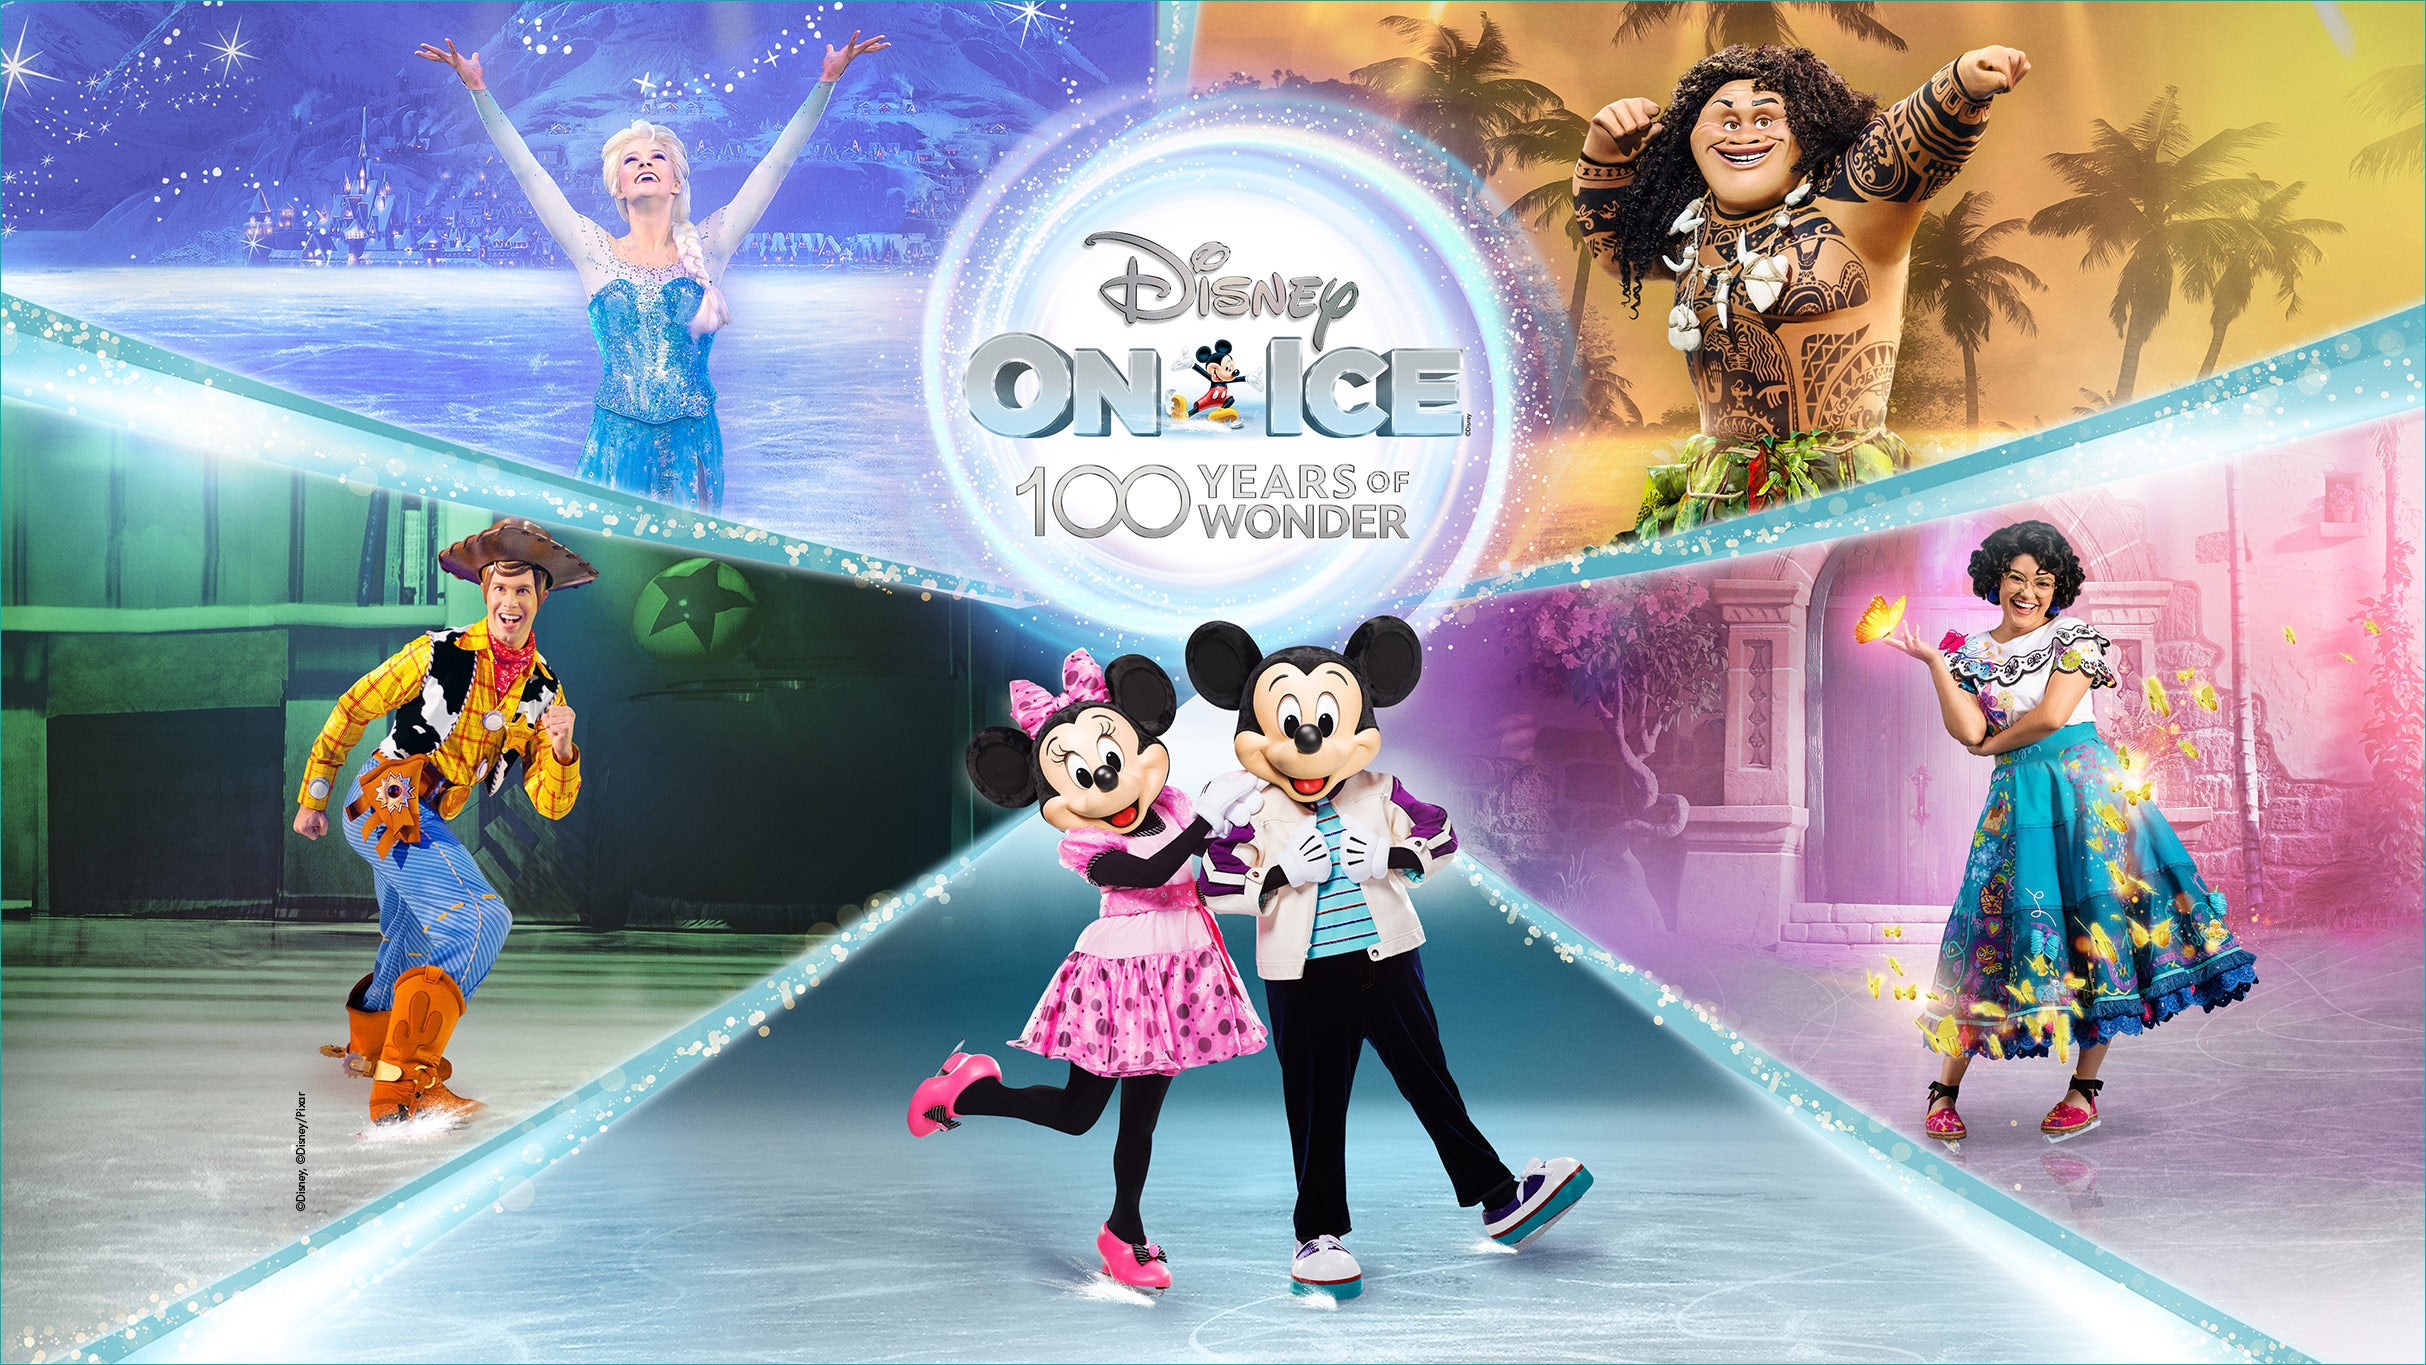 Disney on Ice presents 100 Years of Wonder in Newcastle Upon Tyne promo photo for Ticketmaster presale offer code